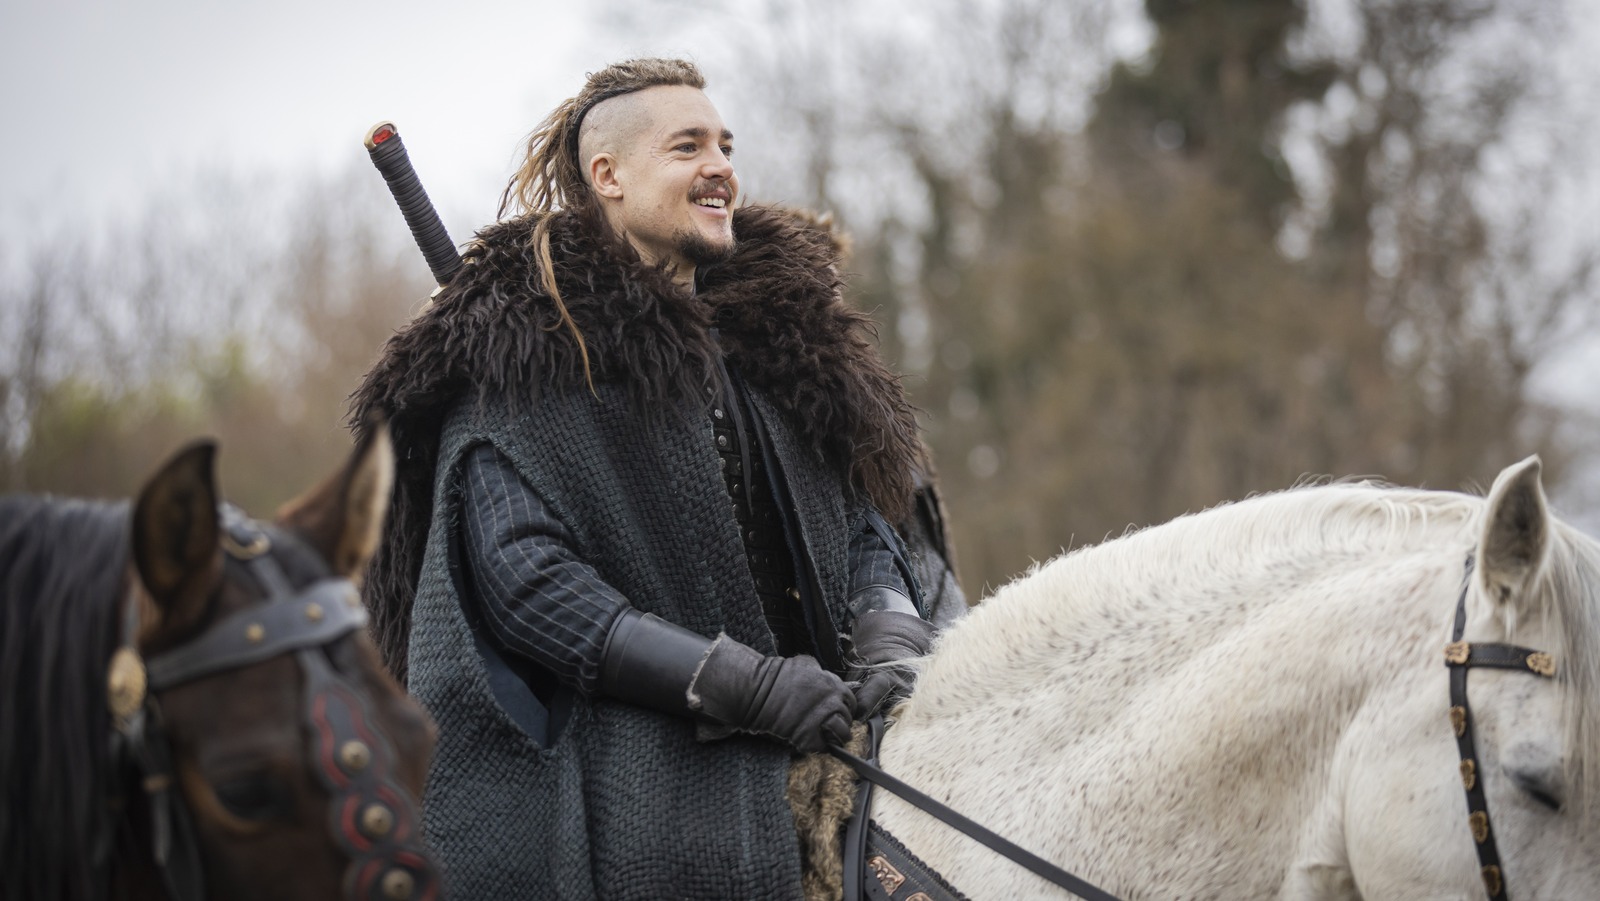 The Last Kingdom: Was Uhtred of Bebbanburg a real person?